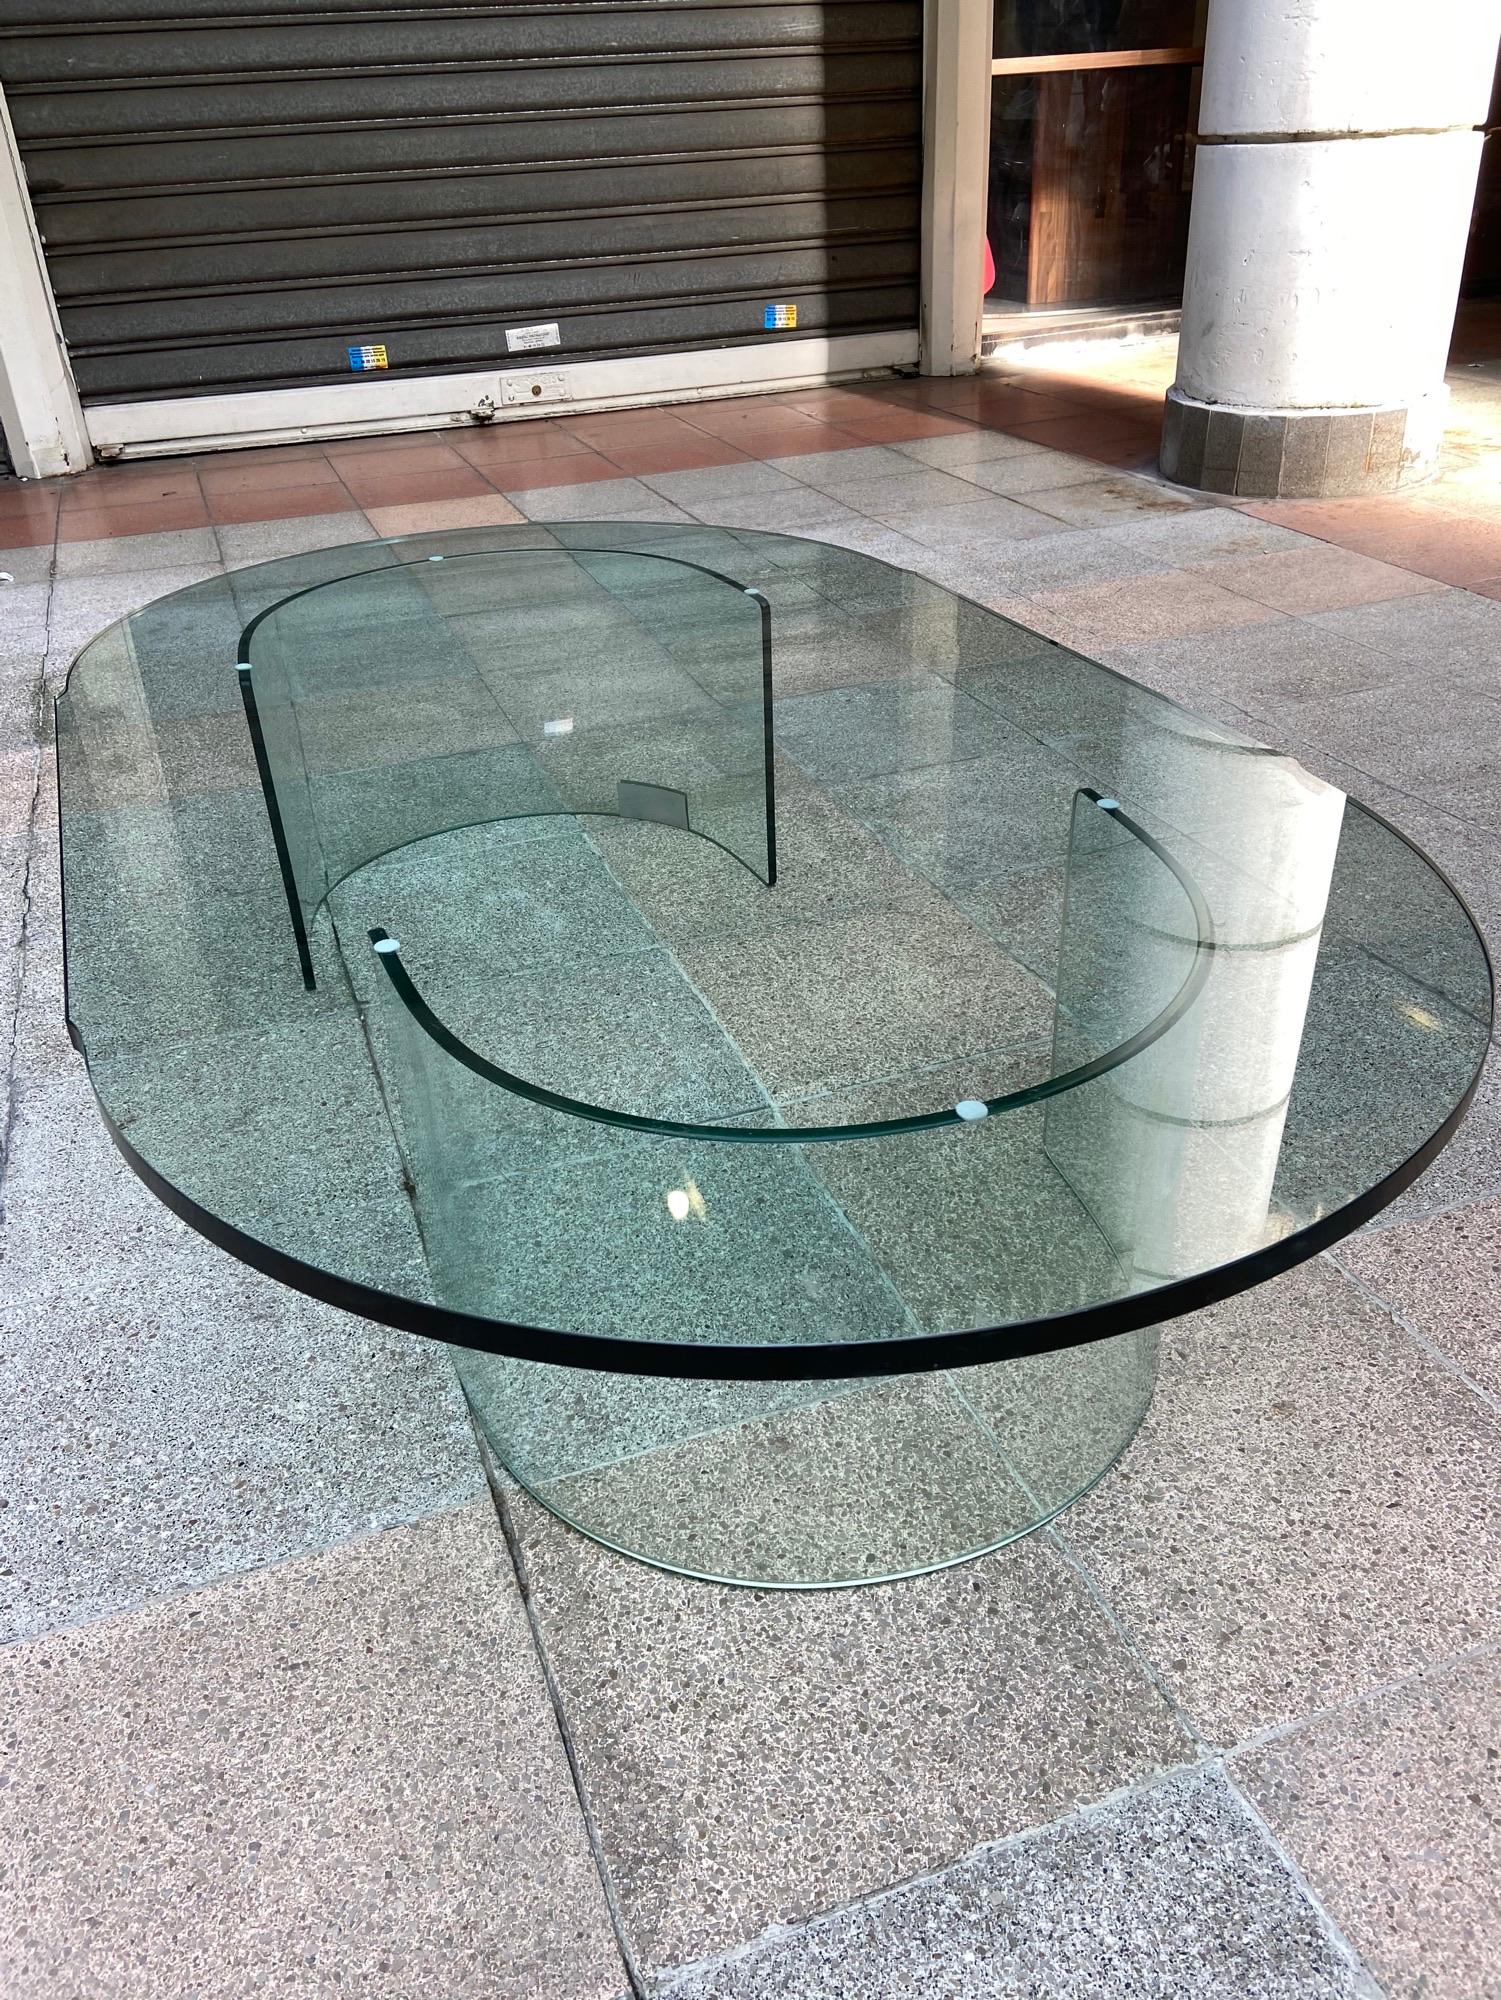 Giorgetto Giugiaro - coffee table - Circa 1990
Signed Giugiaro / printed on a metal plate
Very thick glass: 2cm
There is a small chip on the table top ( see picture ) 
L138.5xP81xH33 cm 



